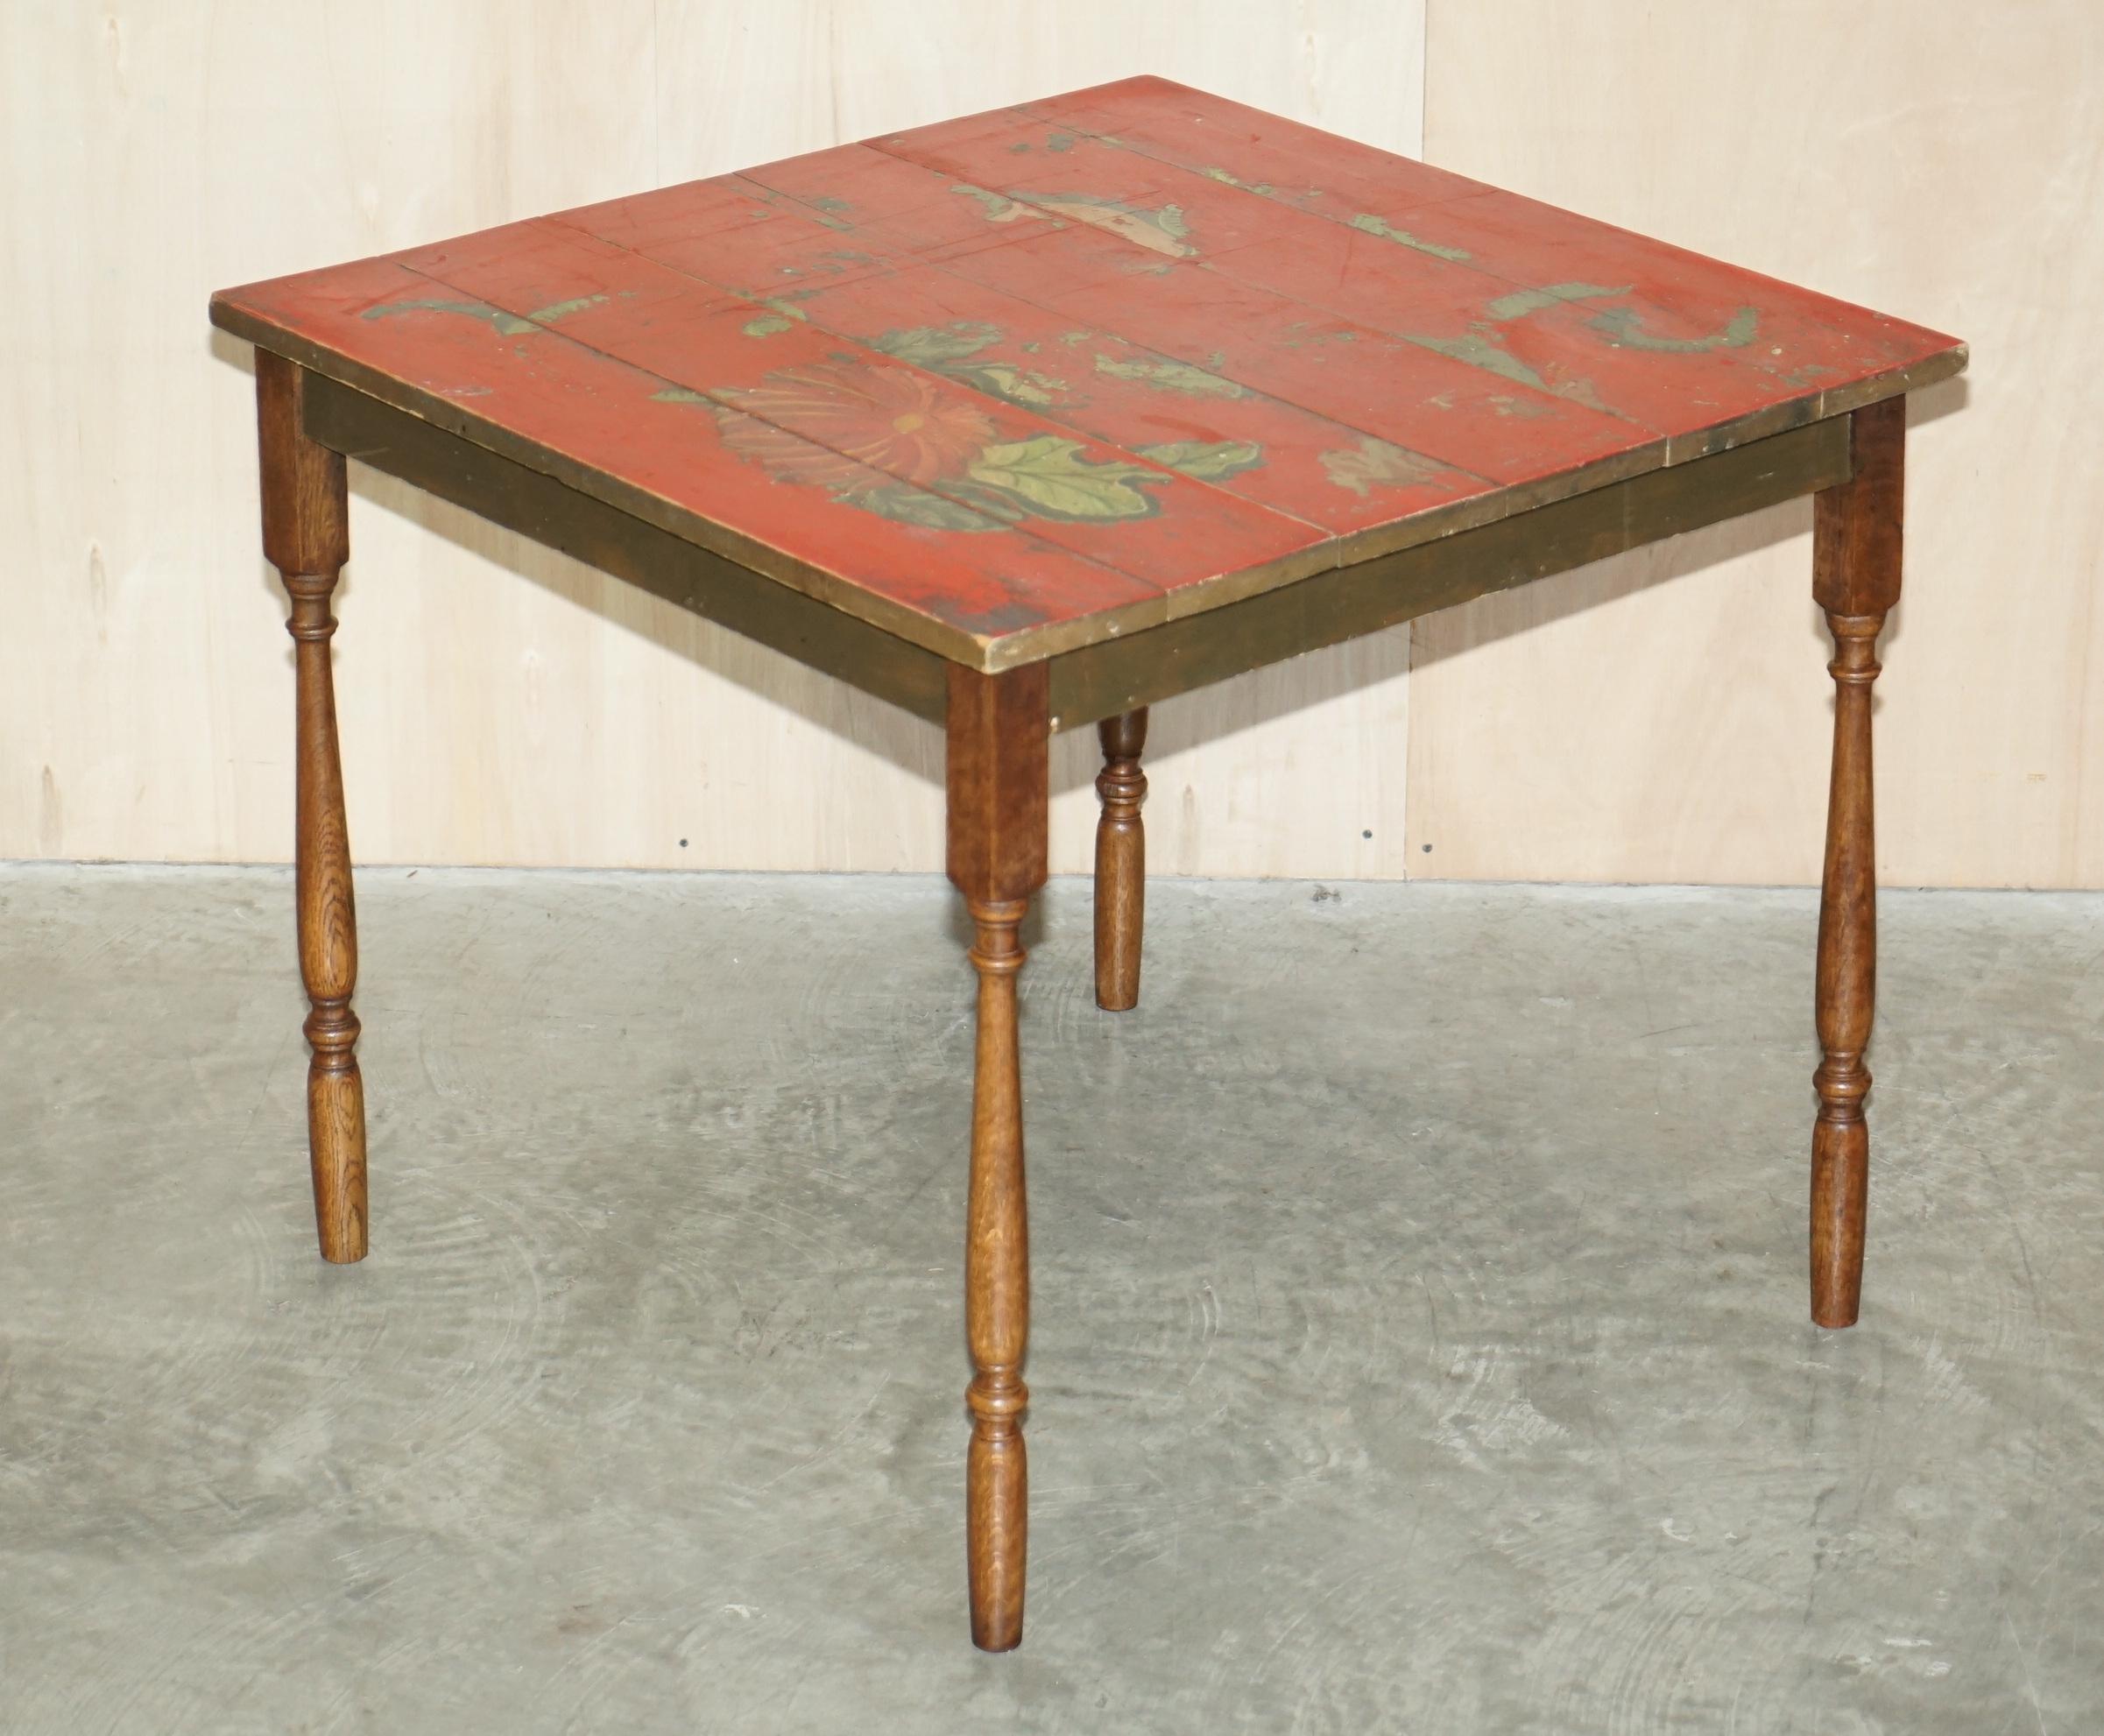 We are delighted to offer for sale 1 of 10 stunning hand made in France vendange wine tasting tables with removable legs.

This sale is for one table, the other nine will be listed shortly under my other items, each one has pretty much the same